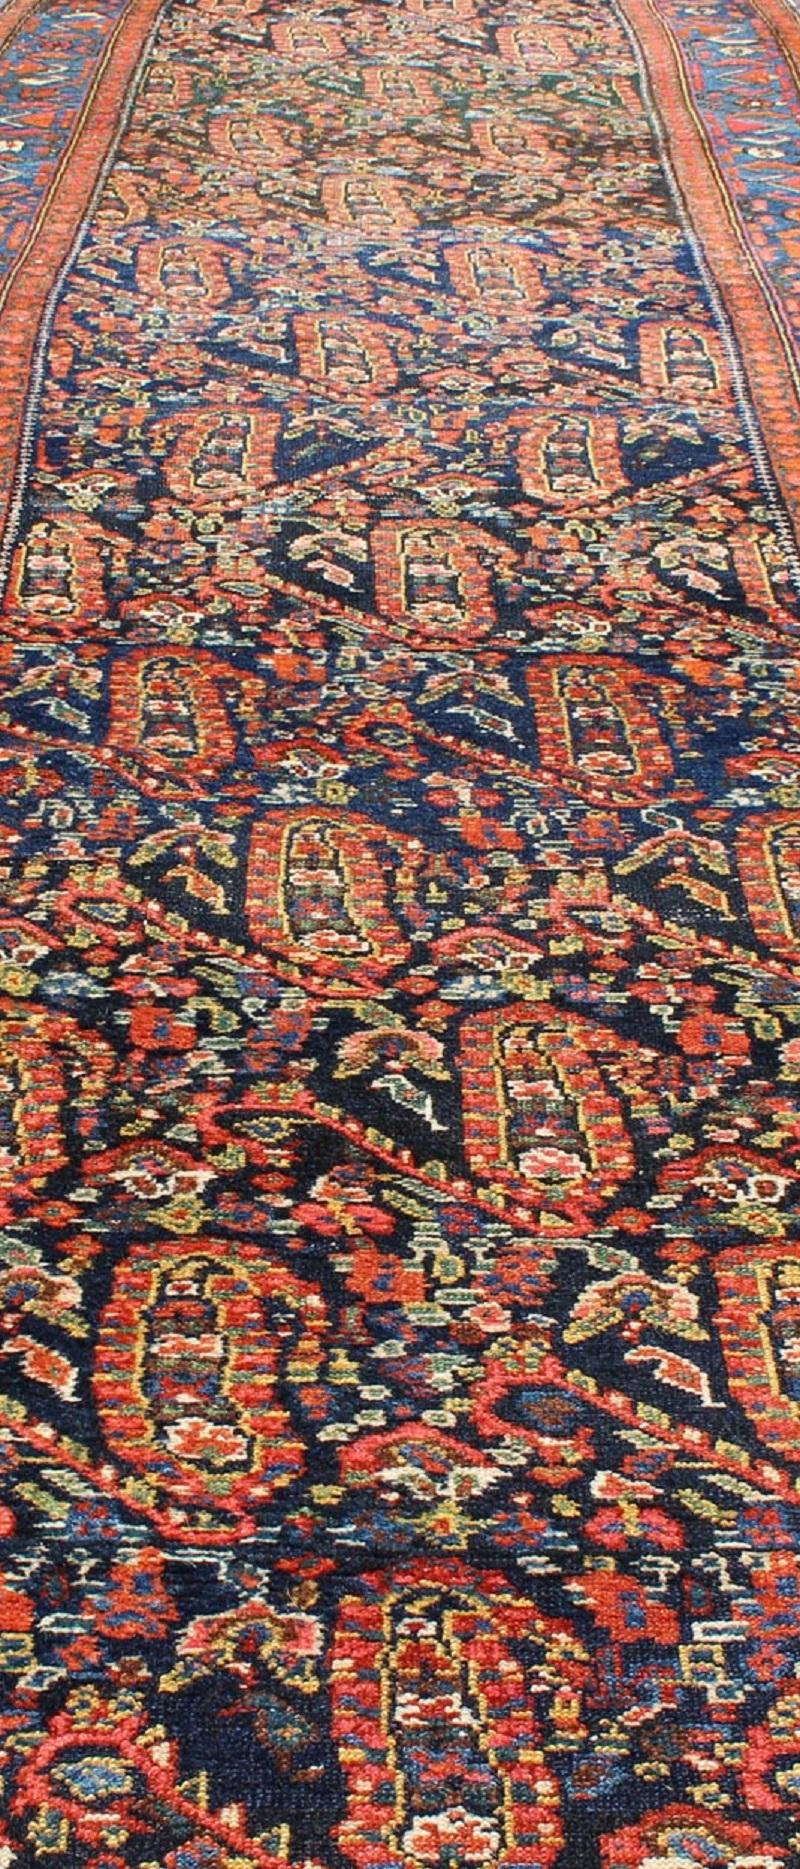 All-Over Design Antique Persian Malayer Long Runner in Blue and Burnt Orange  6